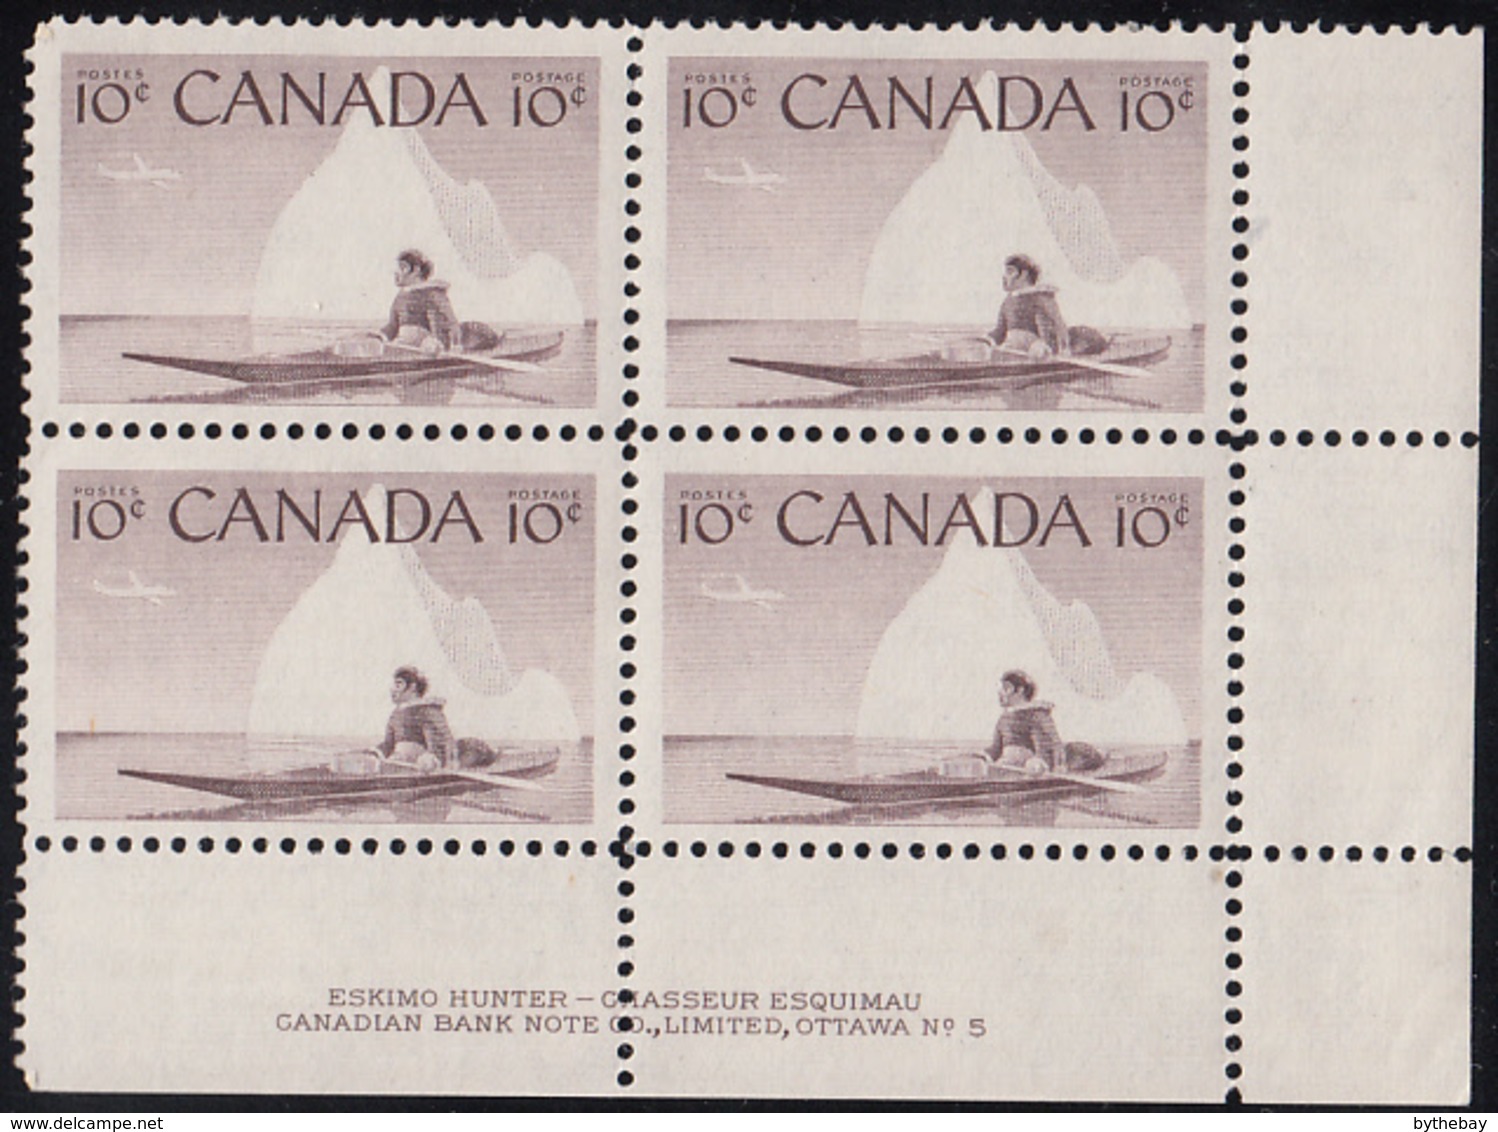 Canada 1955 MNH Sc #351 10c Inuk And Kayak Plate #5 LR - Plate Number & Inscriptions